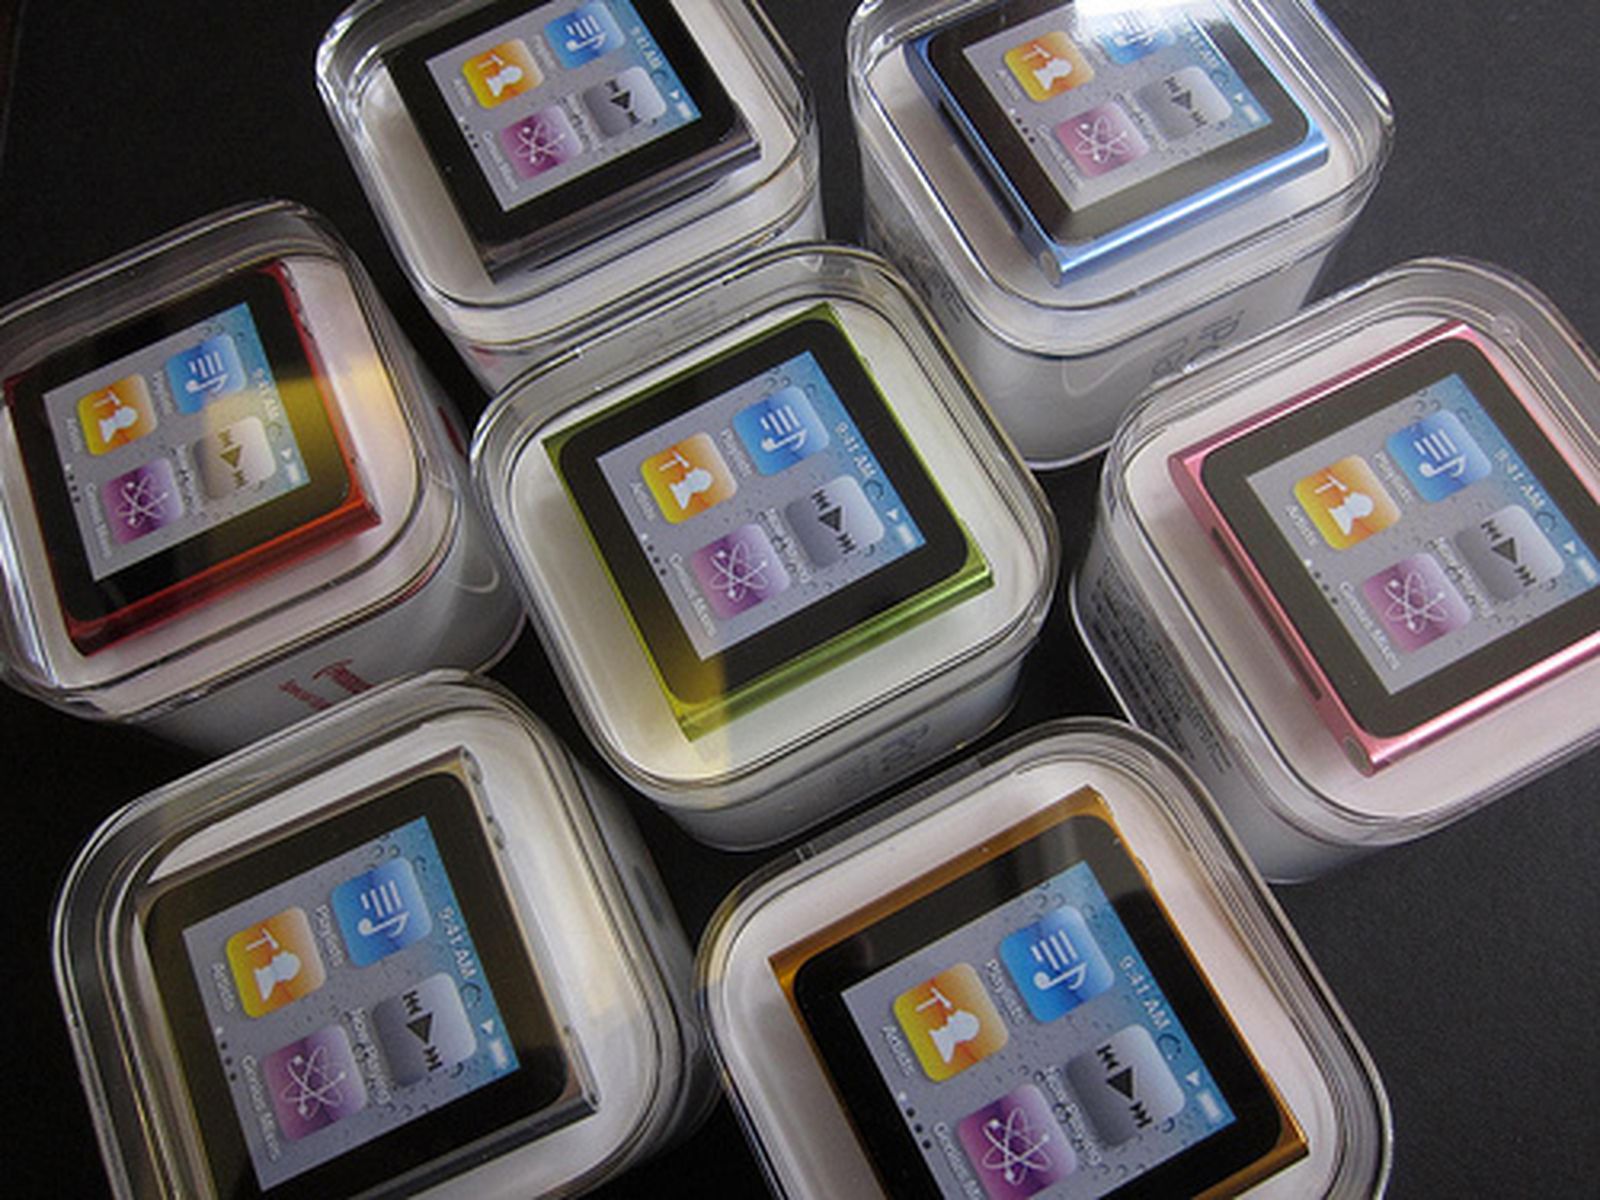 Unboxing Photos Of Apple S New Ipod Nano And Ipod Touch Macrumors